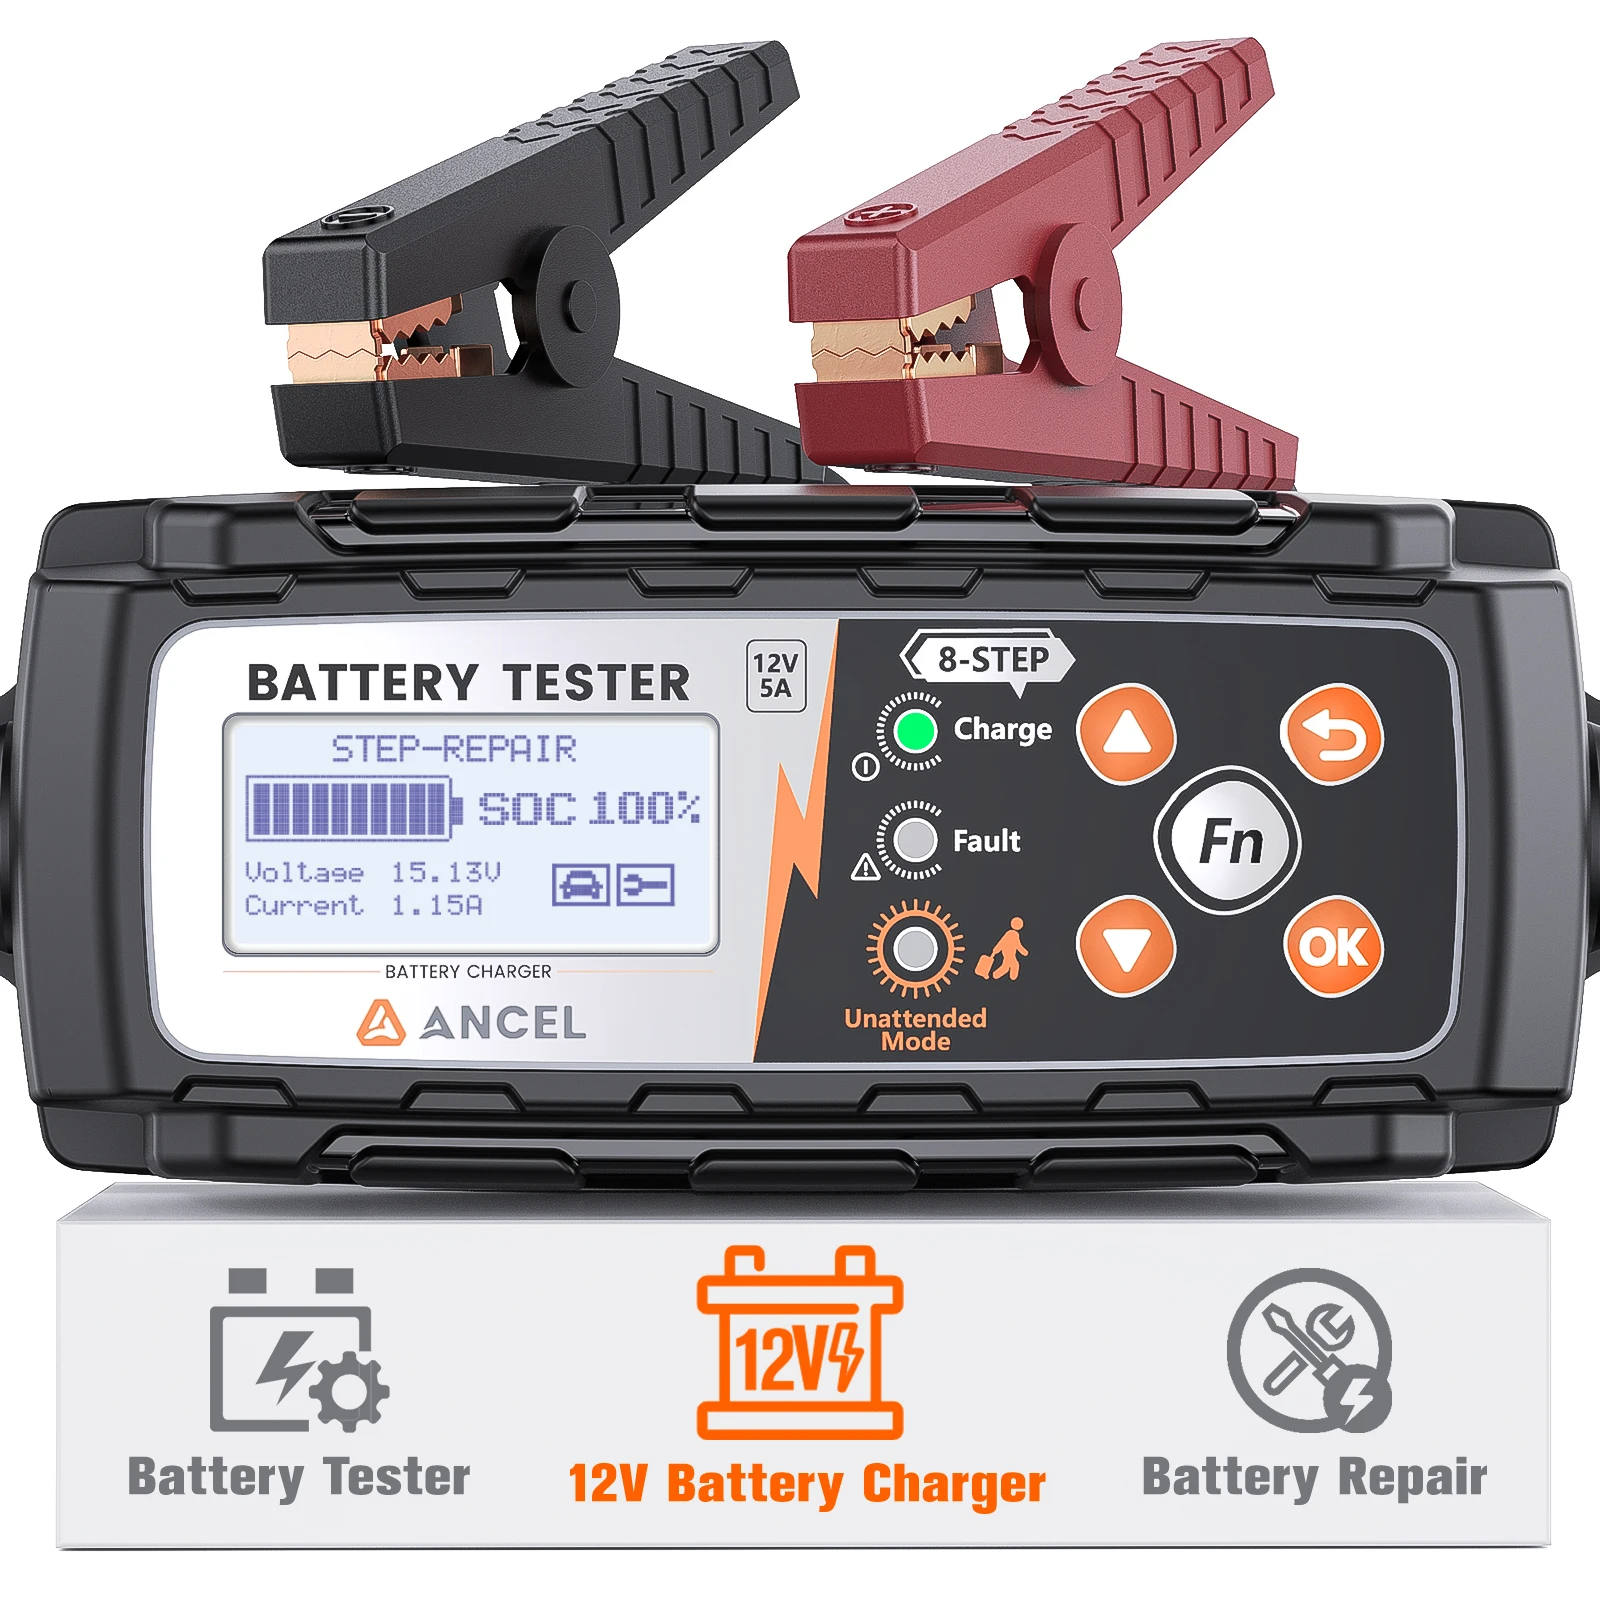 ancel-bt521-car-battery-tester-12v-battery-charger-automative-maintenance-battery-analyzer-cranking-test-battery-charging-tool